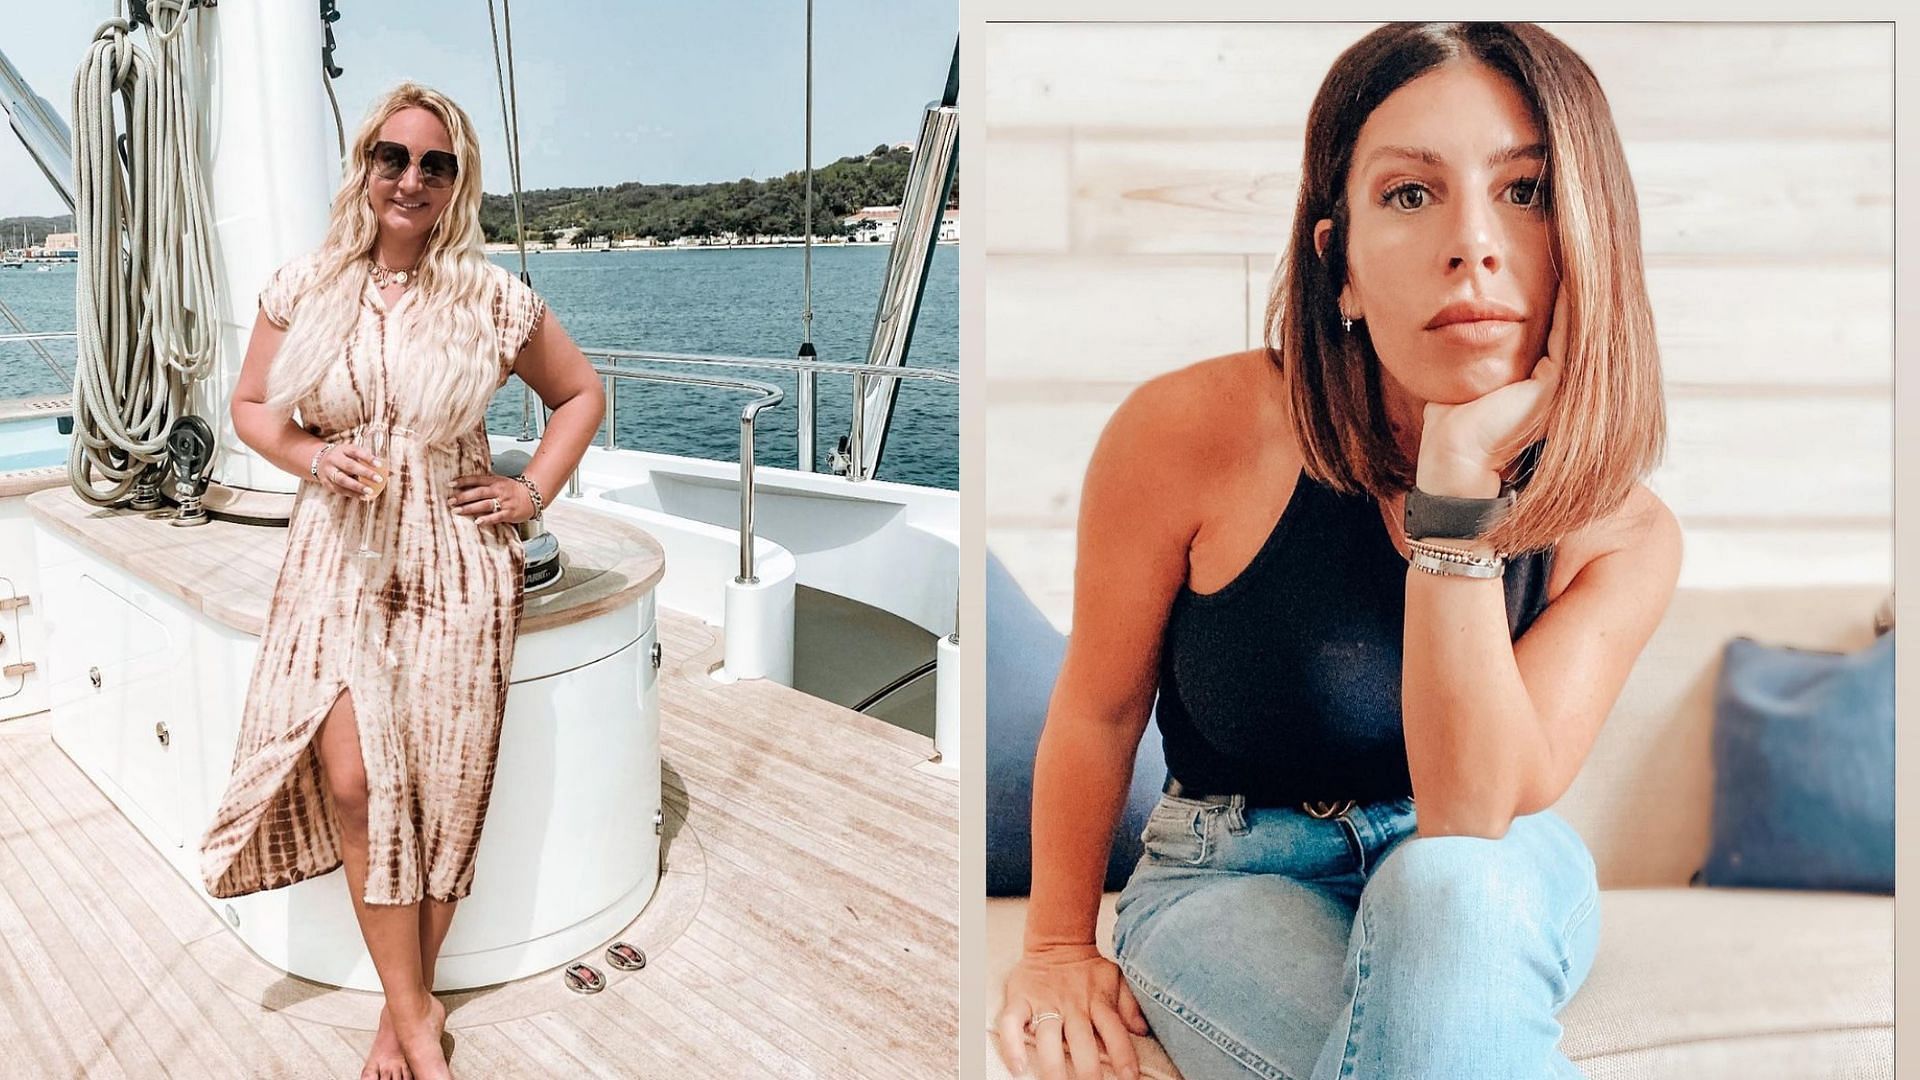 Keely Washburn and Jess Cimato first appeared in Below Deck Sailing Yacht Season 2 (Image via keelymariew and jesscimato/Instagram)